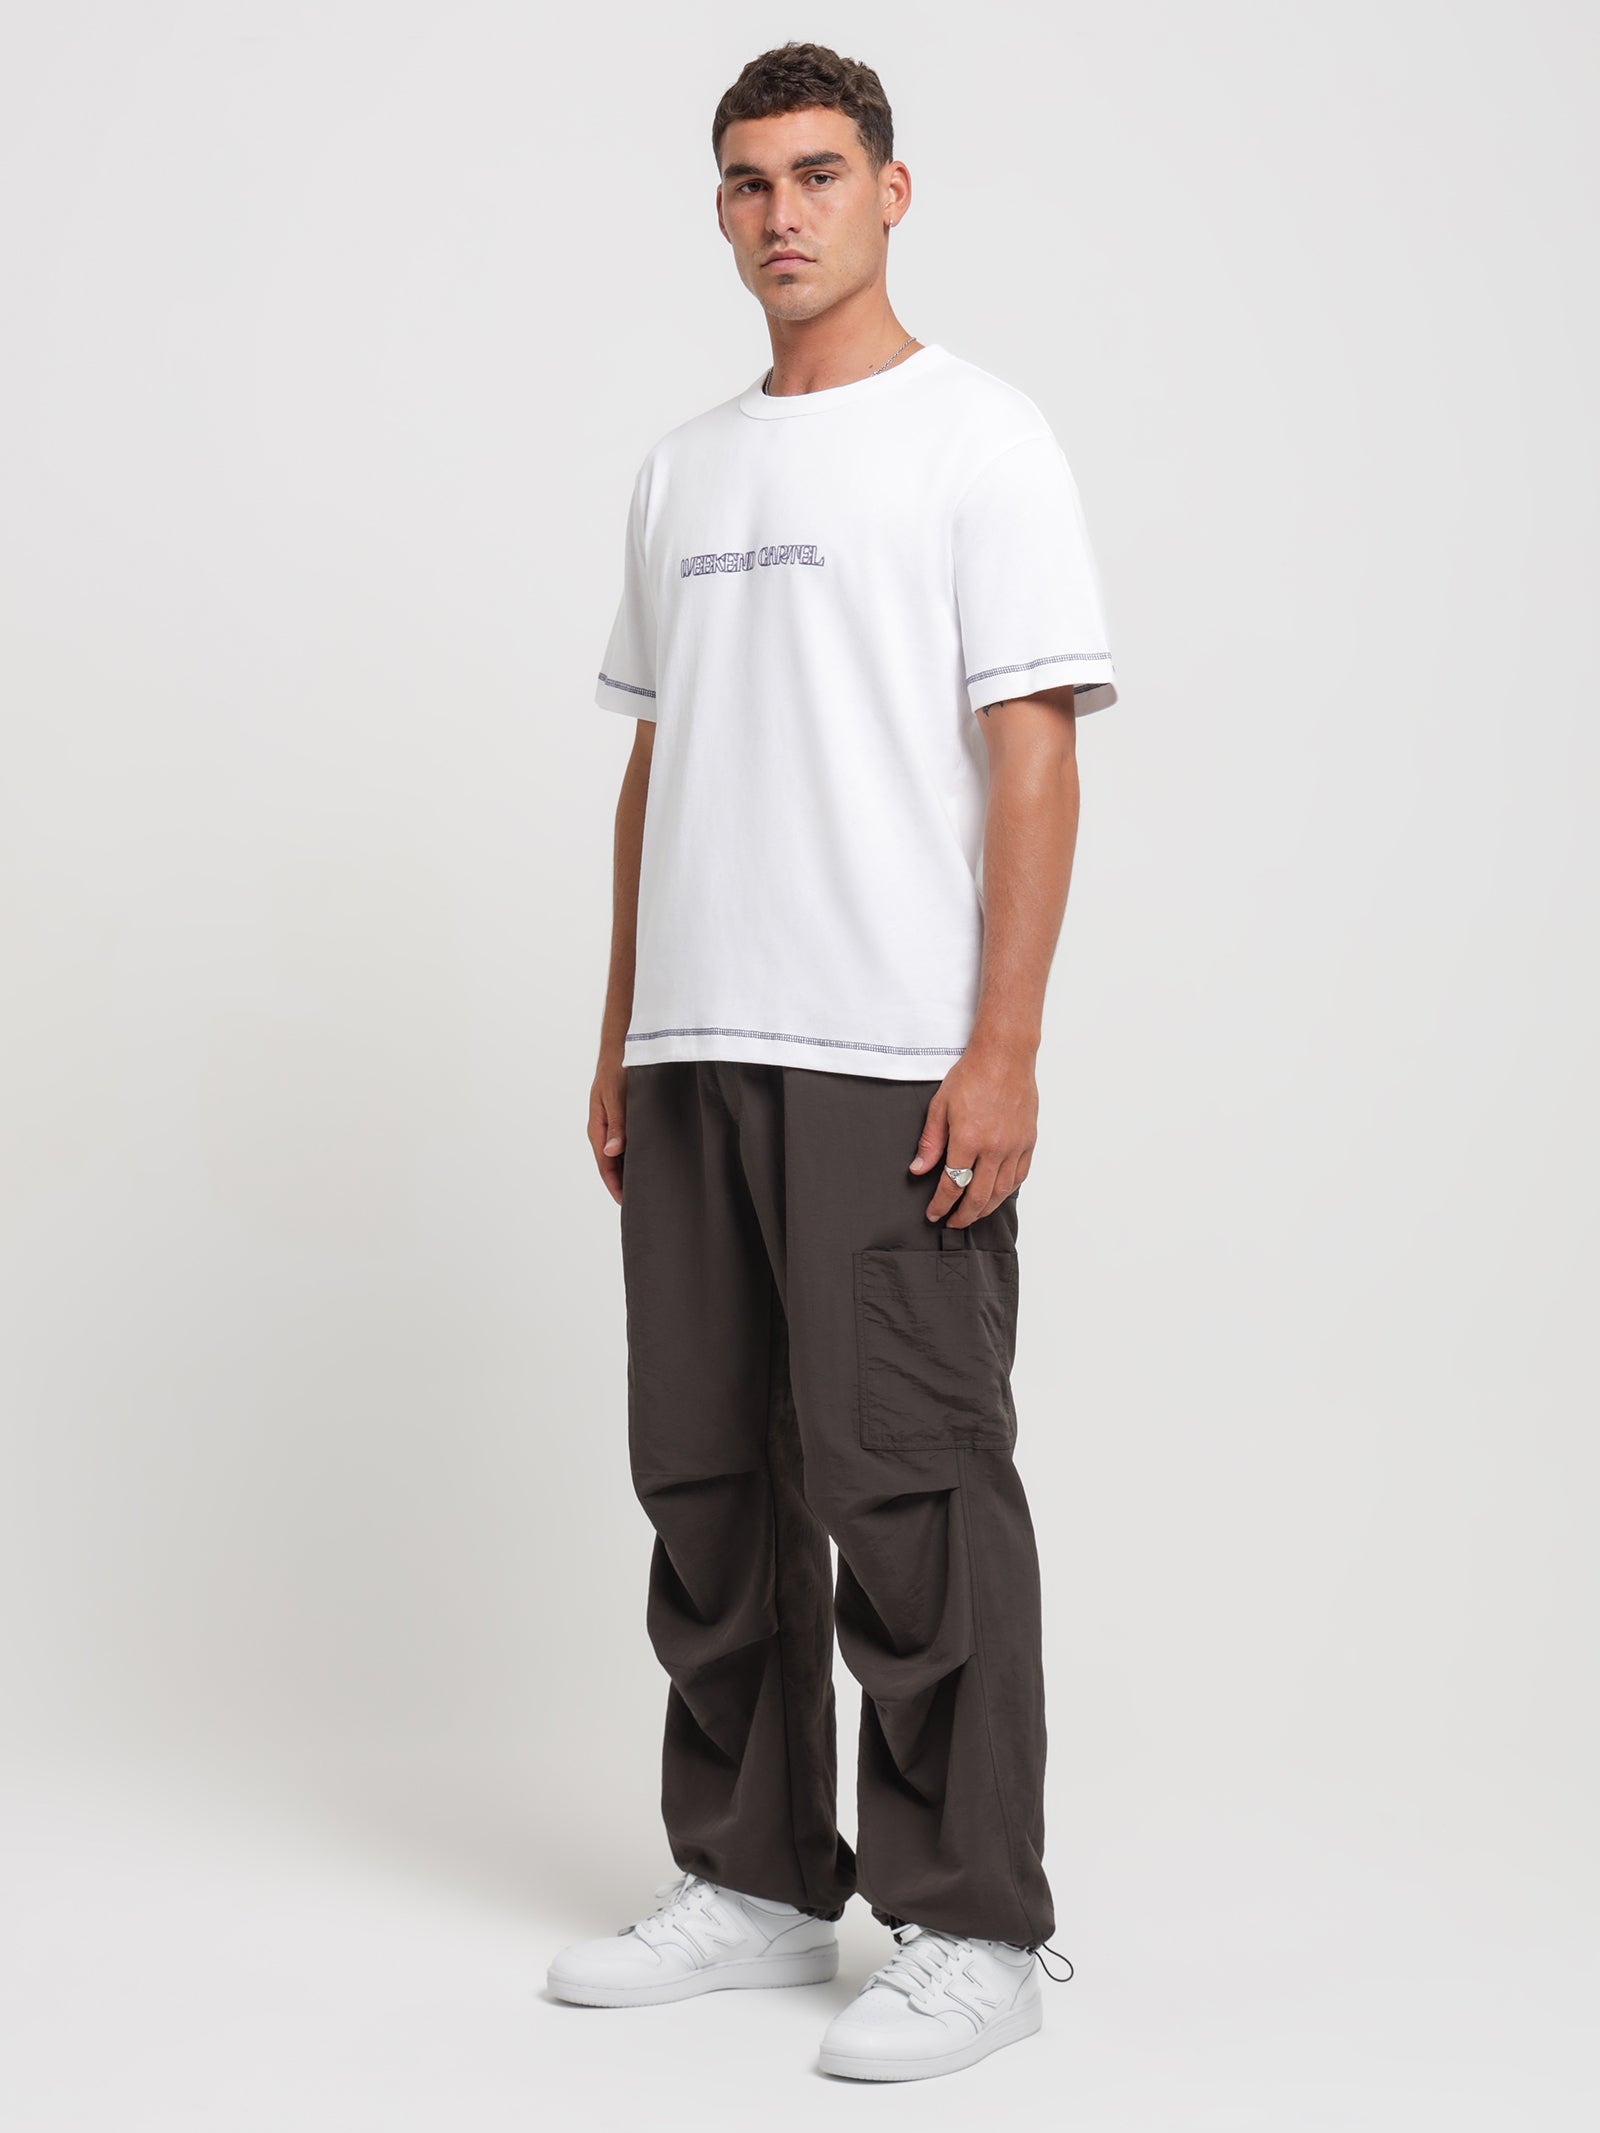 Conspiracy Parachute Pants in Obsidian Black